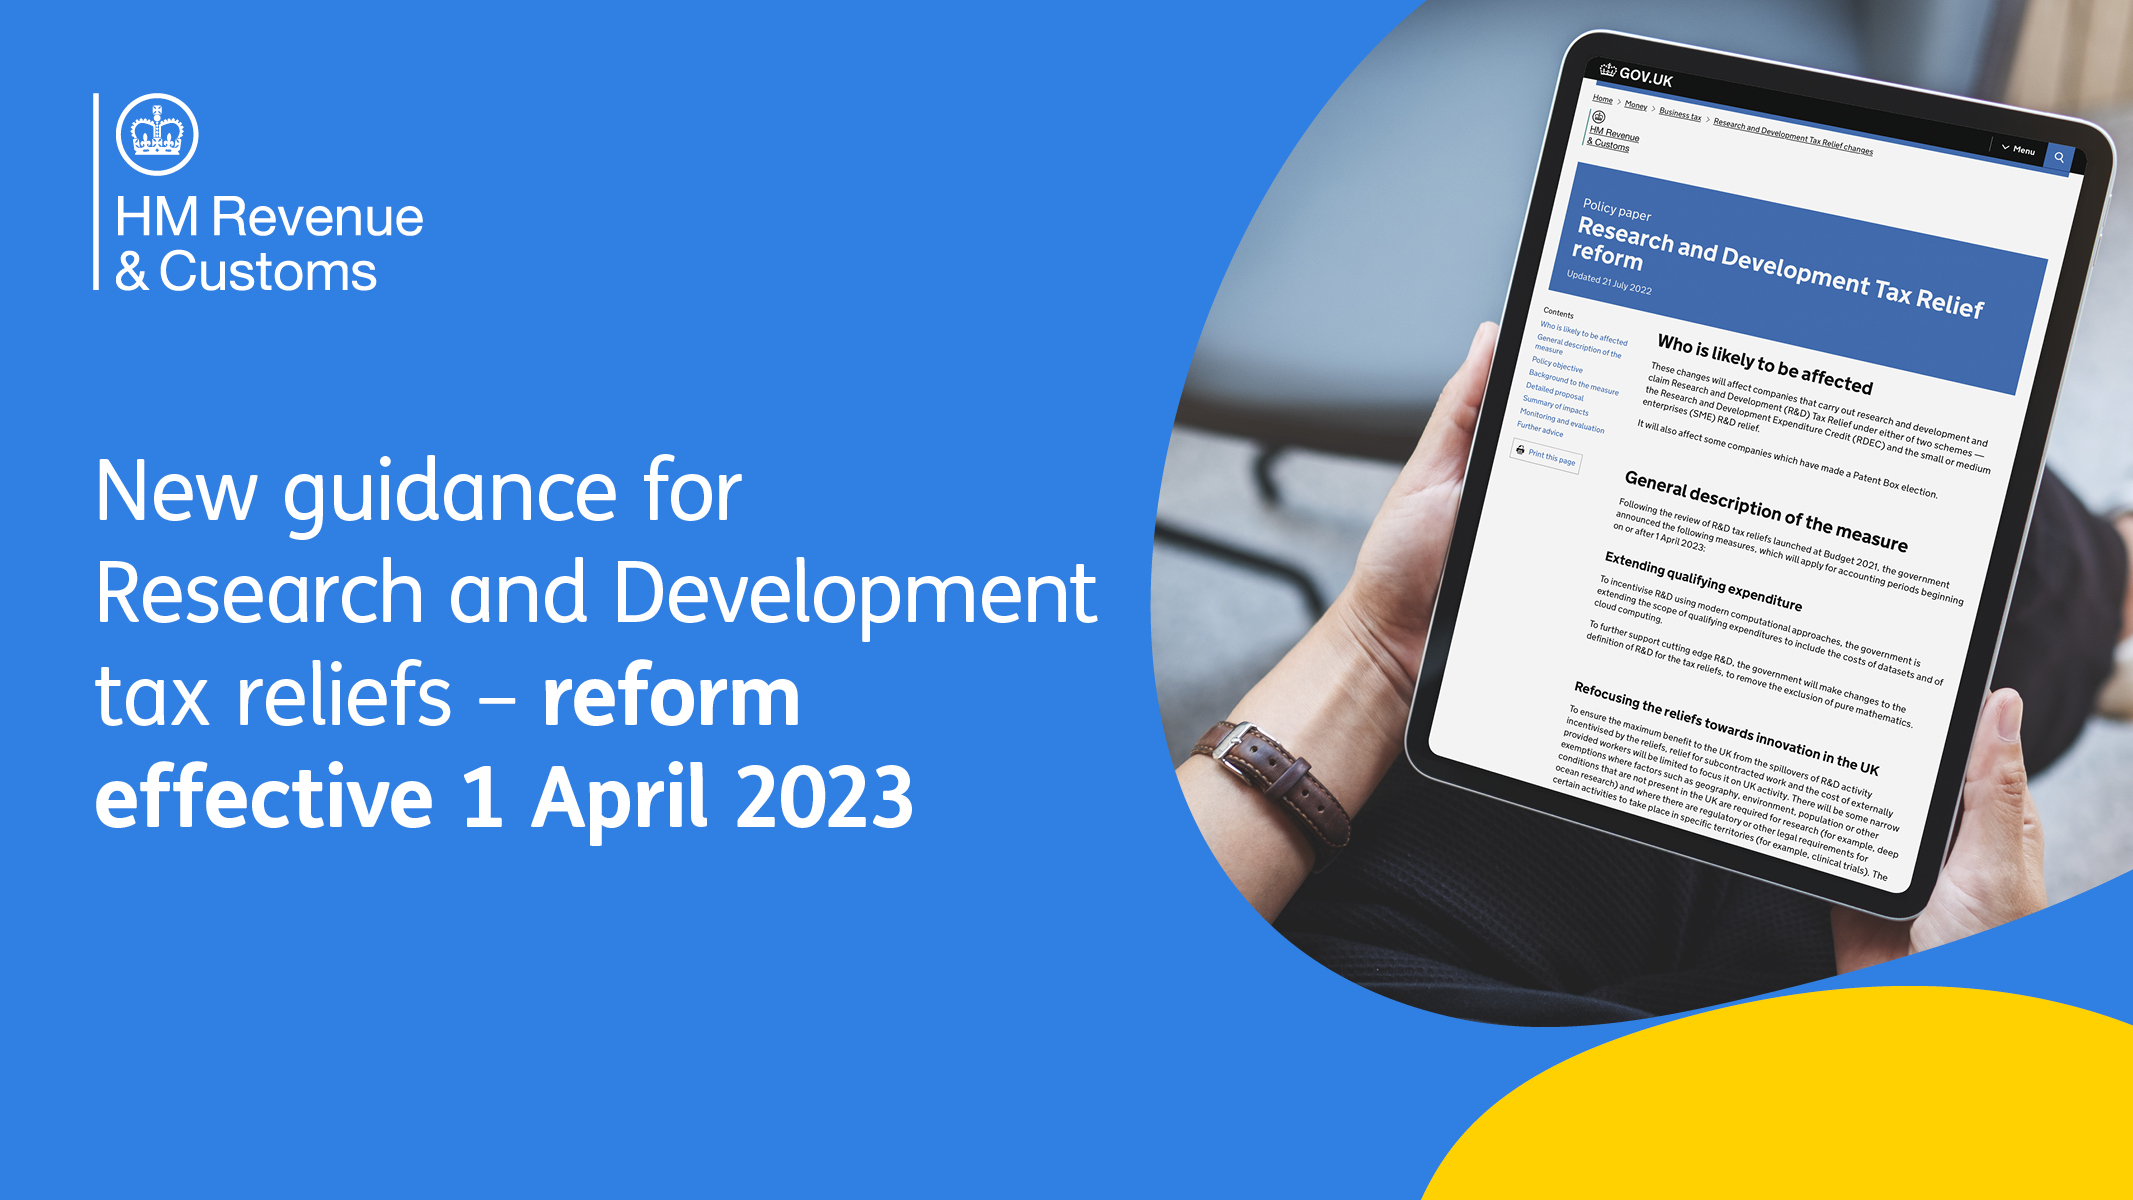 Research and Development (R&D) Tax Relief Changes from 1 April 2023